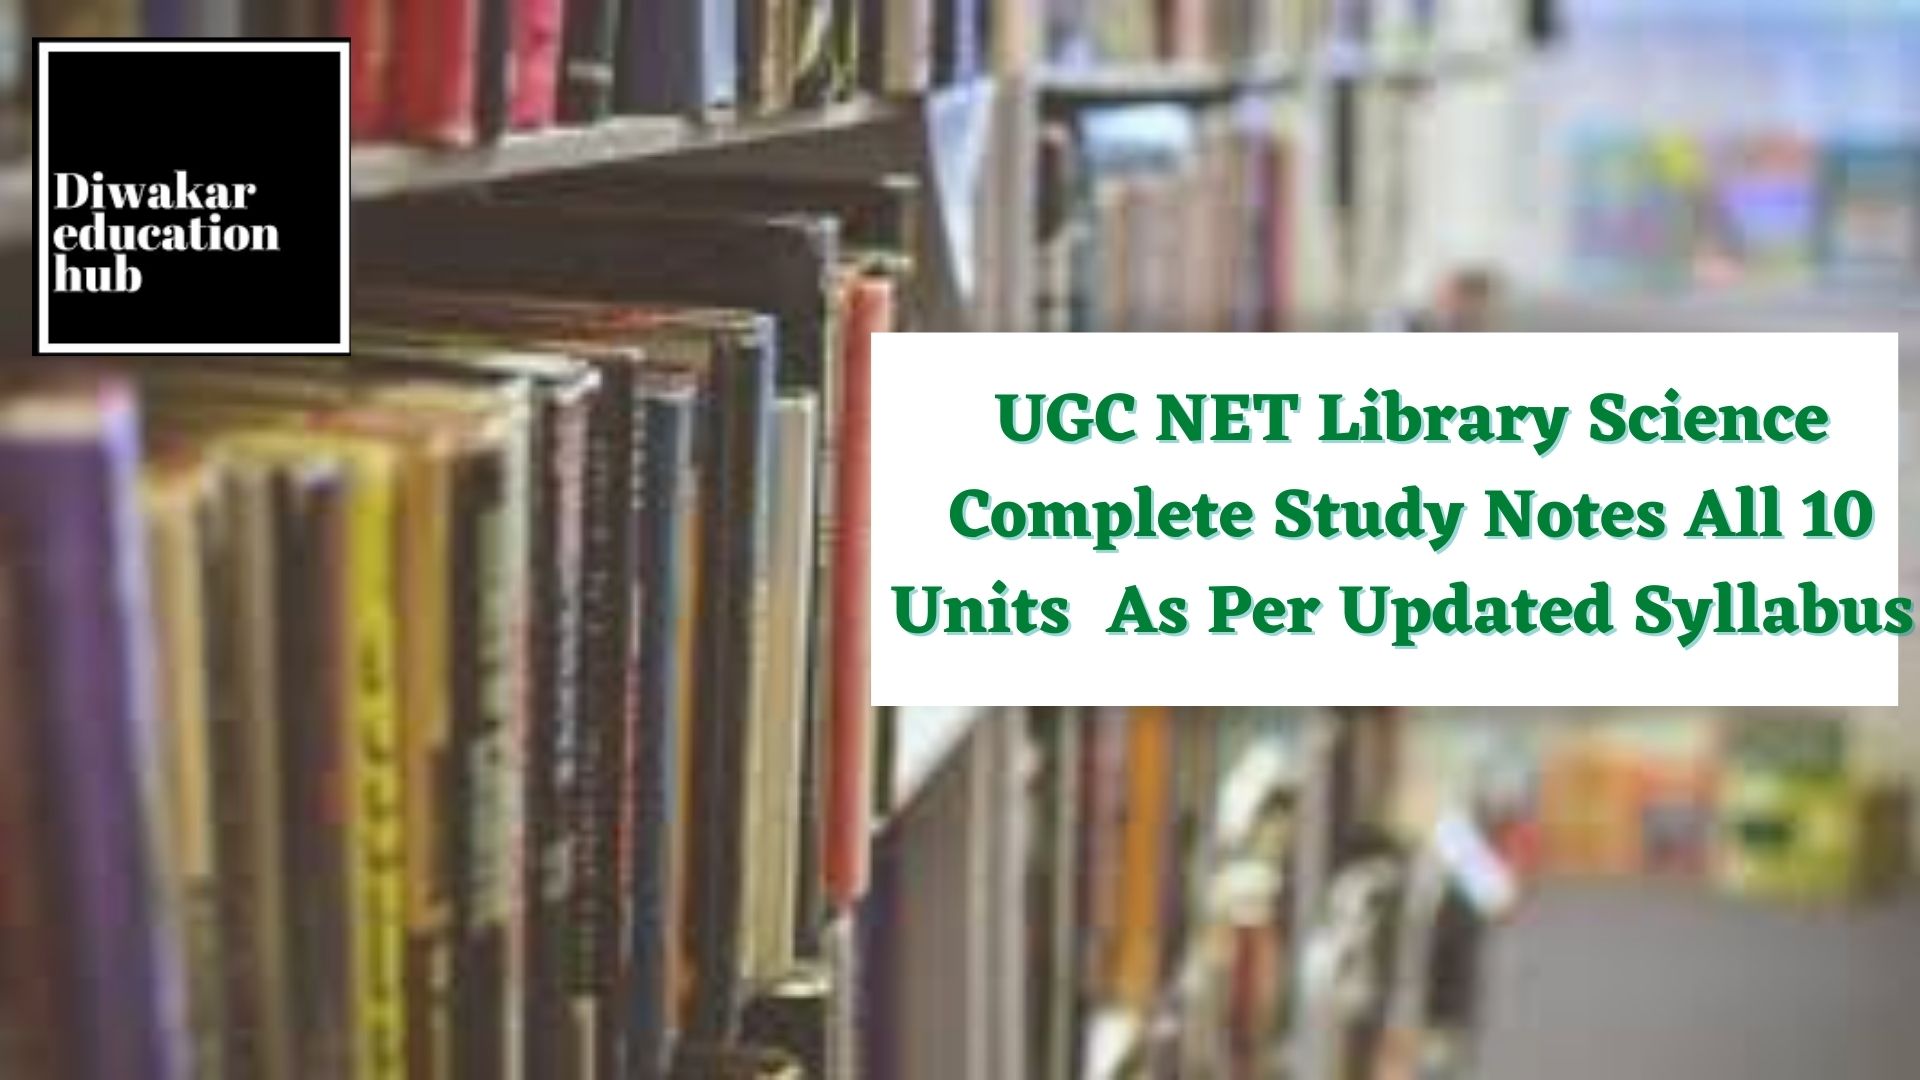 UGC NET Library Science Study Notes